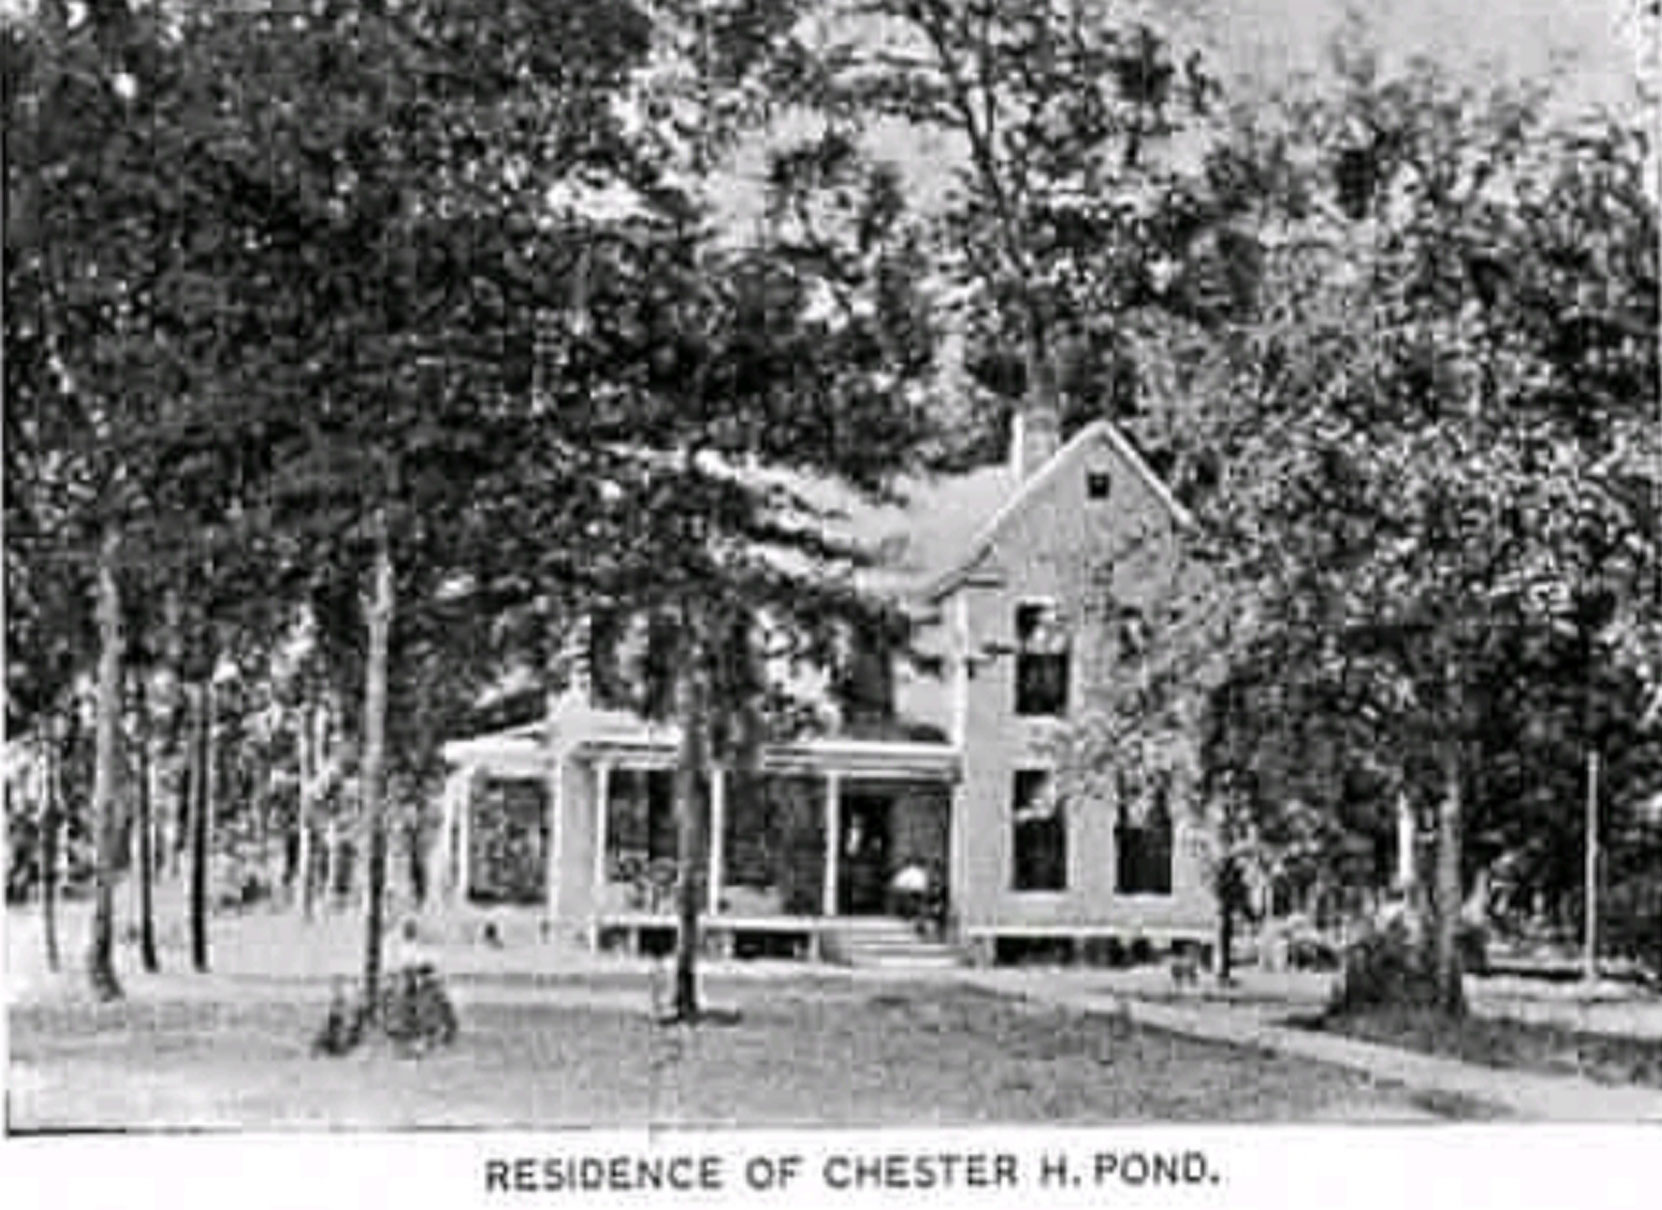 A Moorhead, MS resident sent us this photo of Chester H. Pond's house in Moorhead, Mississippi